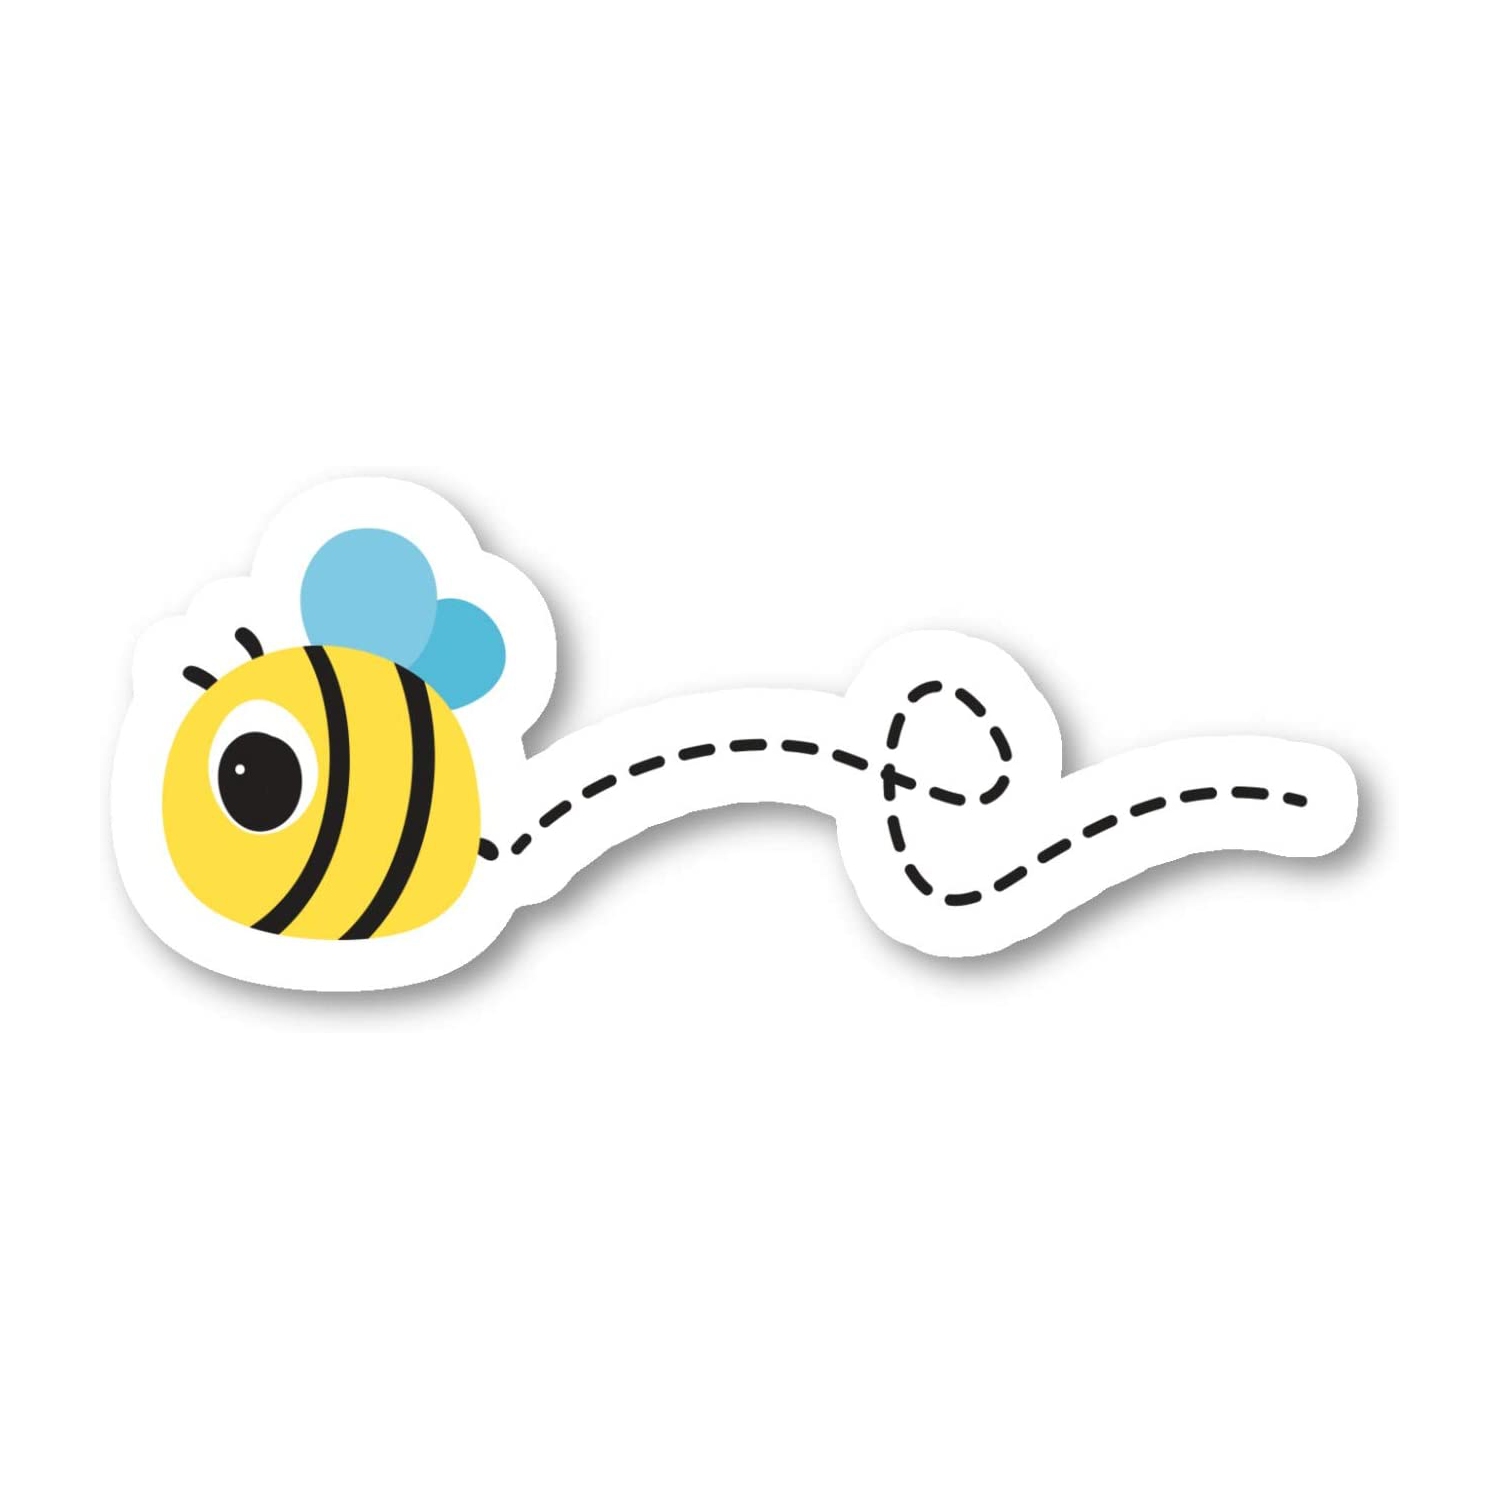 Bumble Bee Sticker Animal Stickers - Laptop Stickers - 2.5" Vinyl Decal - Laptop, Phone, Tablet Vinyl Decal Sticker S4249